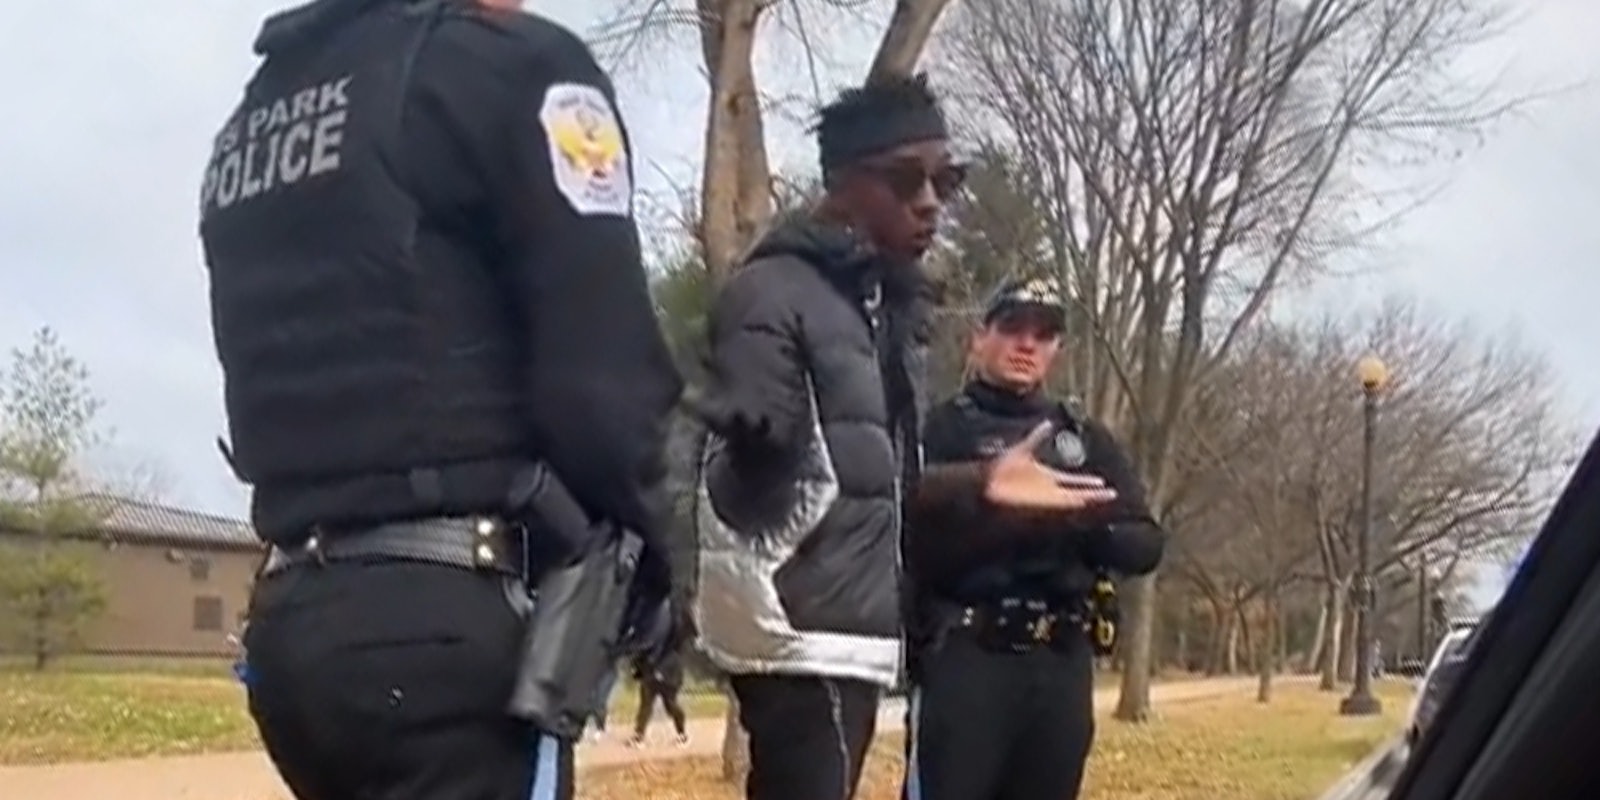 Two white police officers detain shrugging Black man.